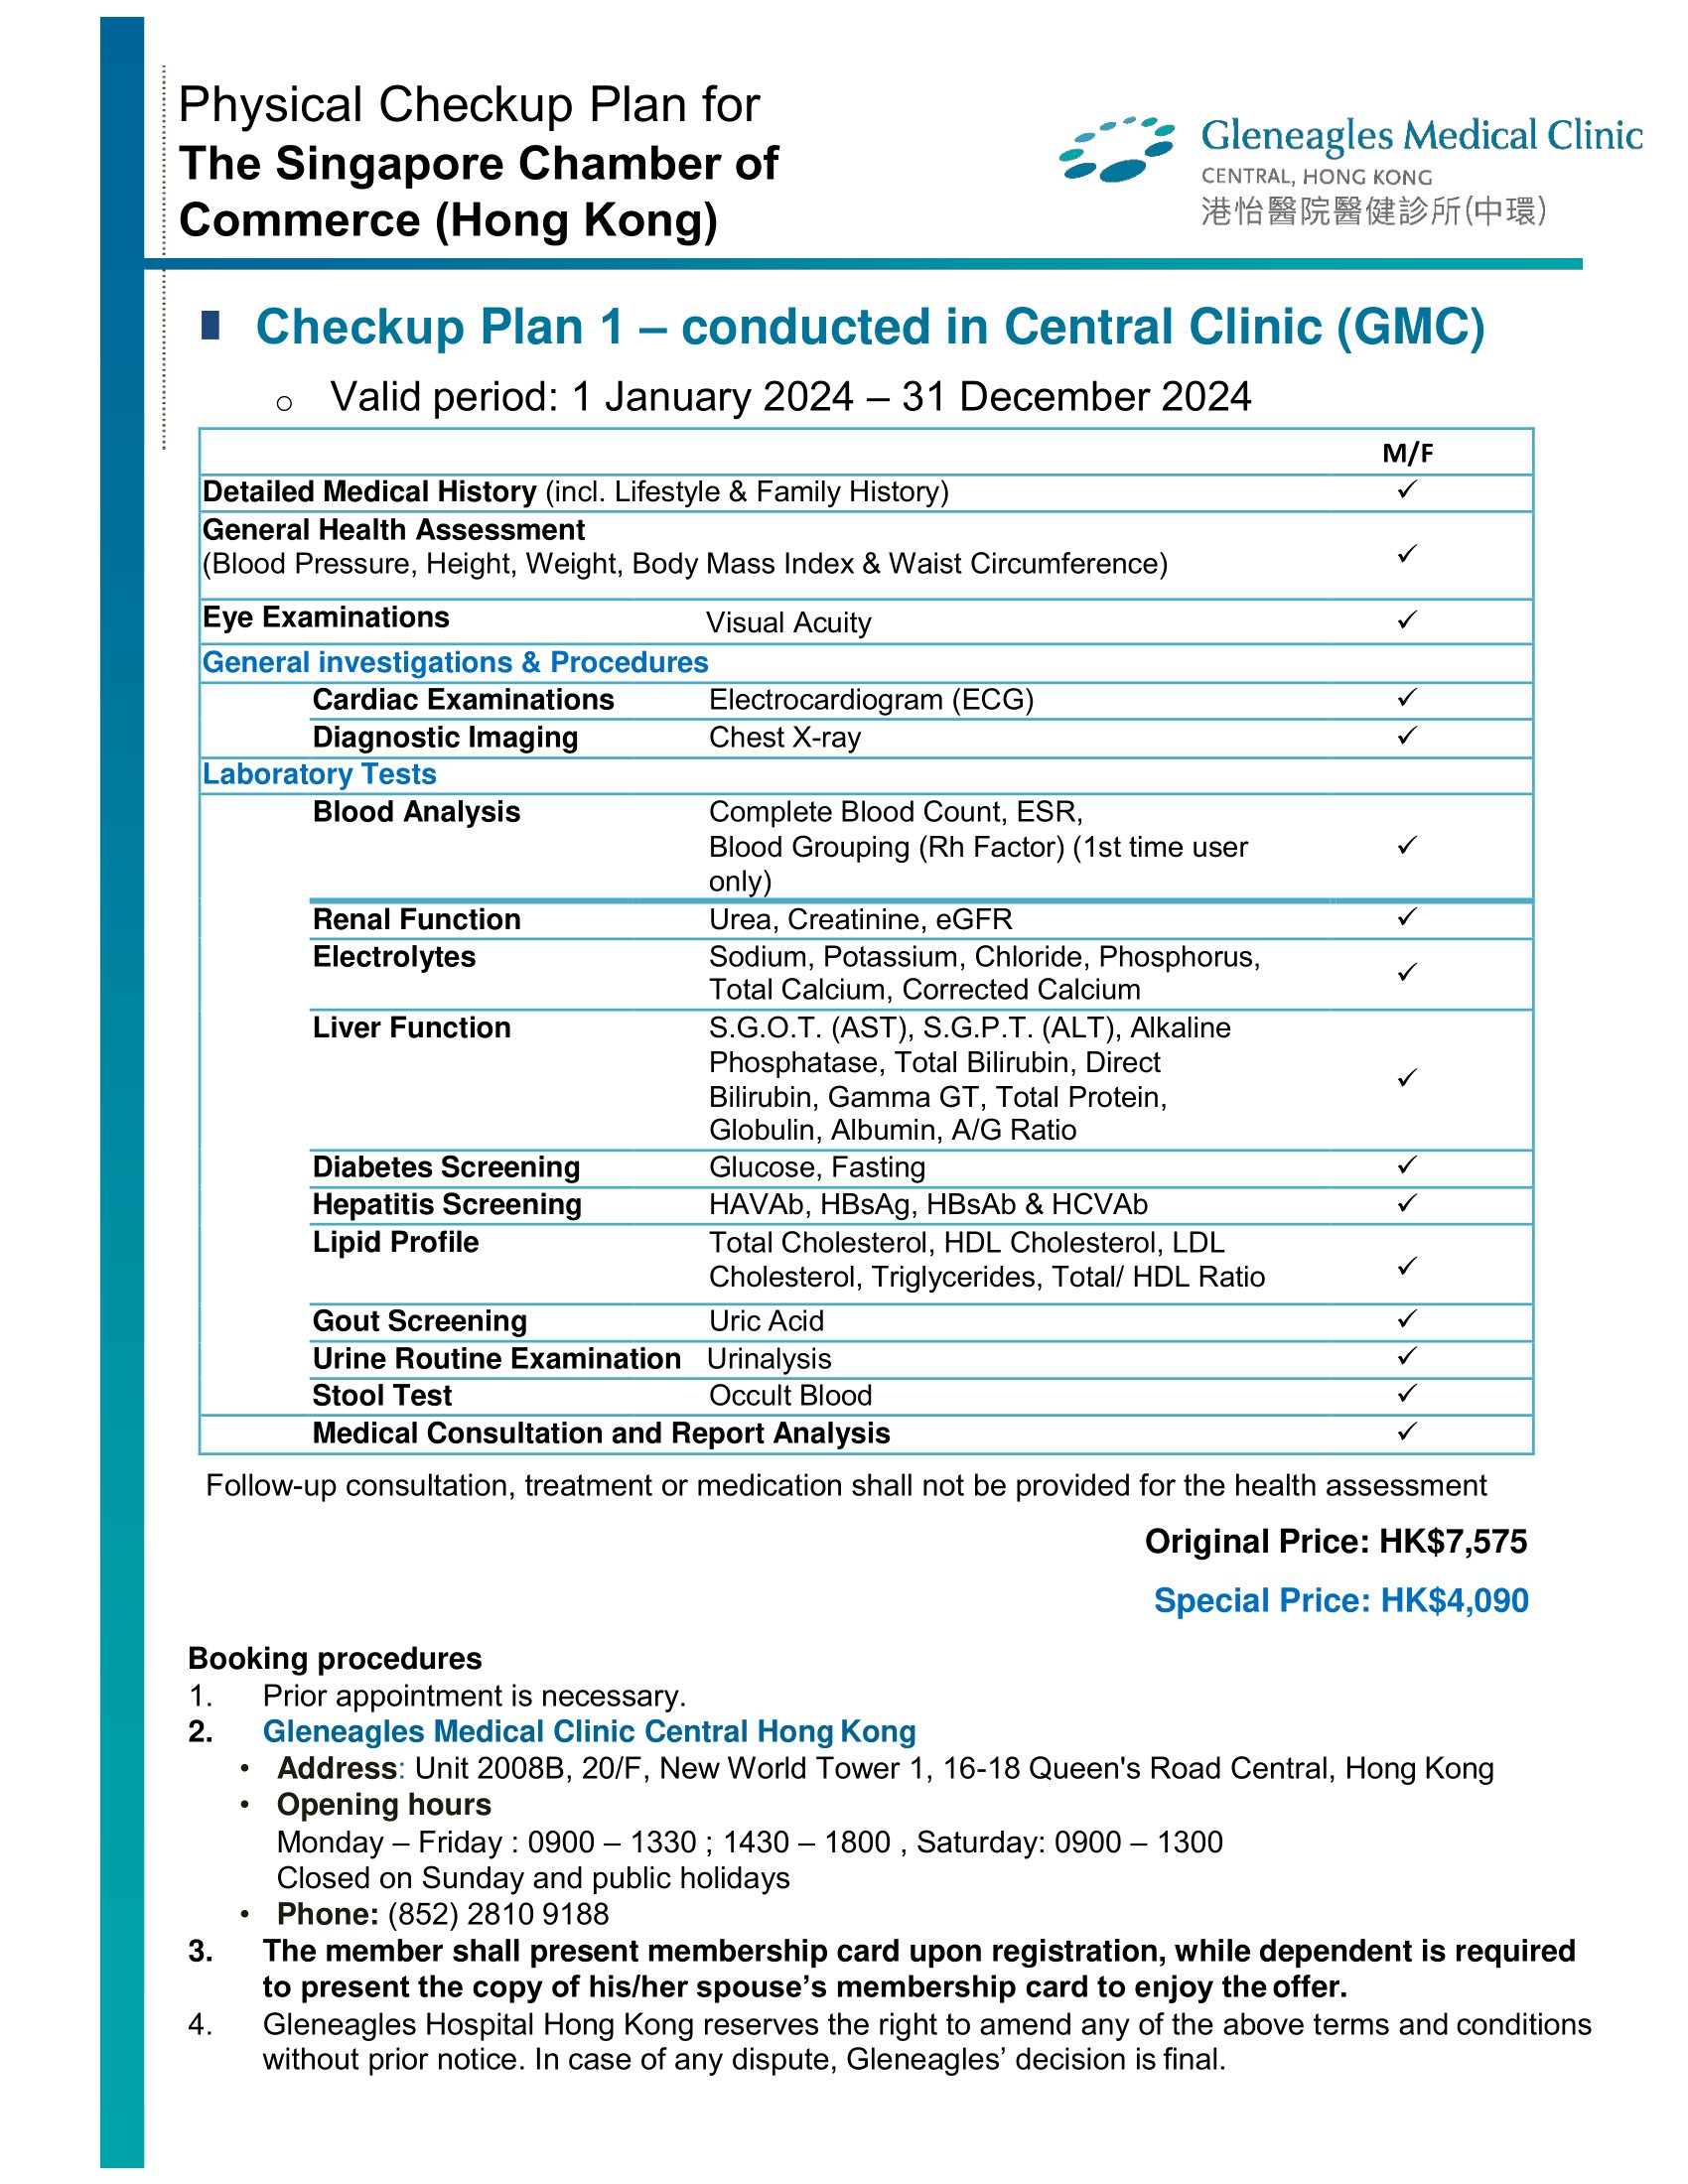 Checkup Plan 1 - Central Clinic